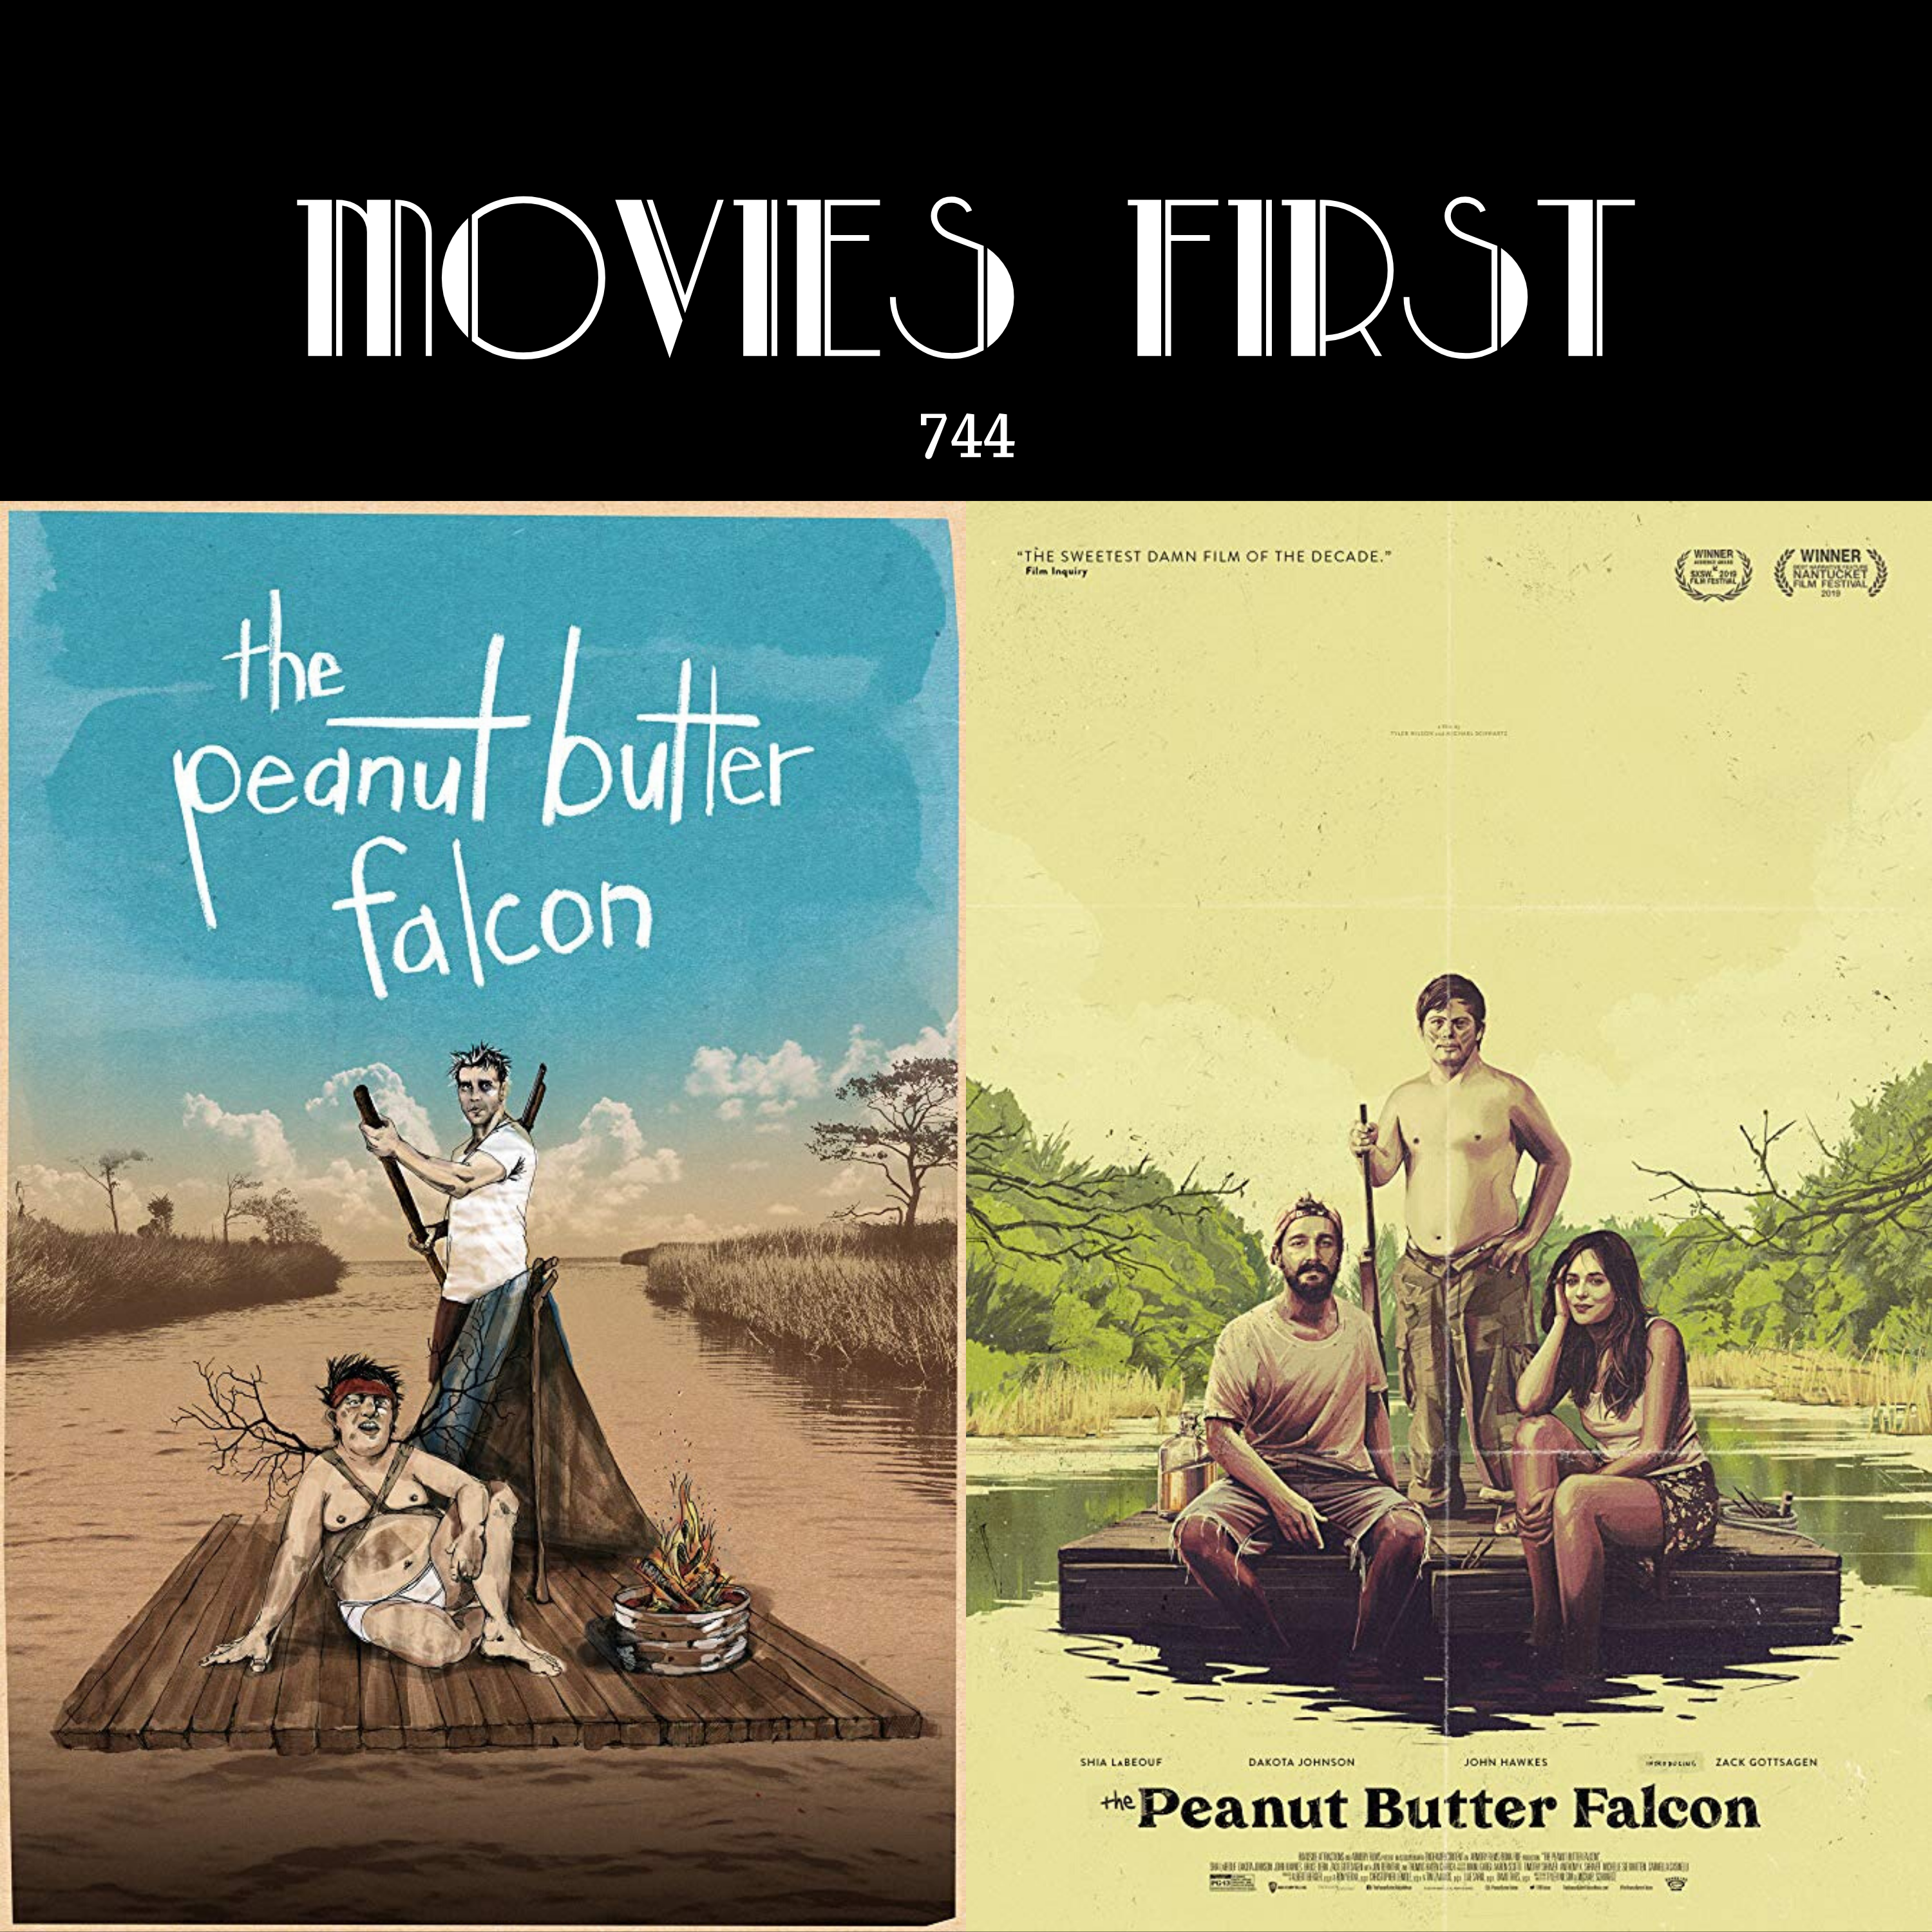 744: The Peanut Butter Falcon (Adventure, Comedy, Drama) (the @MoviesFirst review)